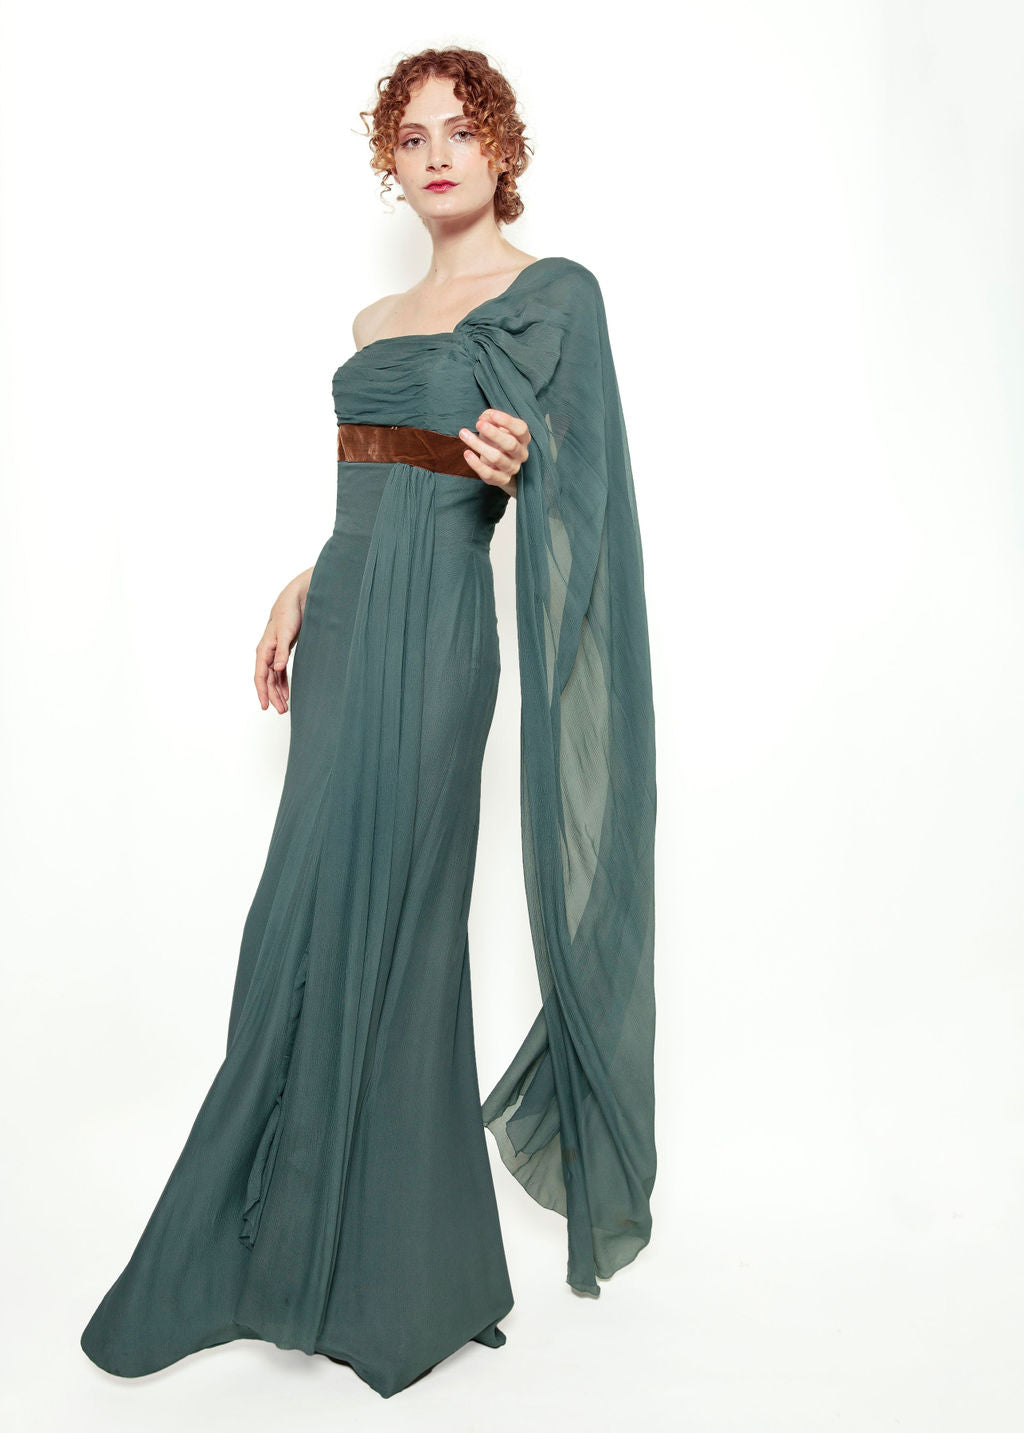 Custom Couture One Shoulder Chiffon Gown